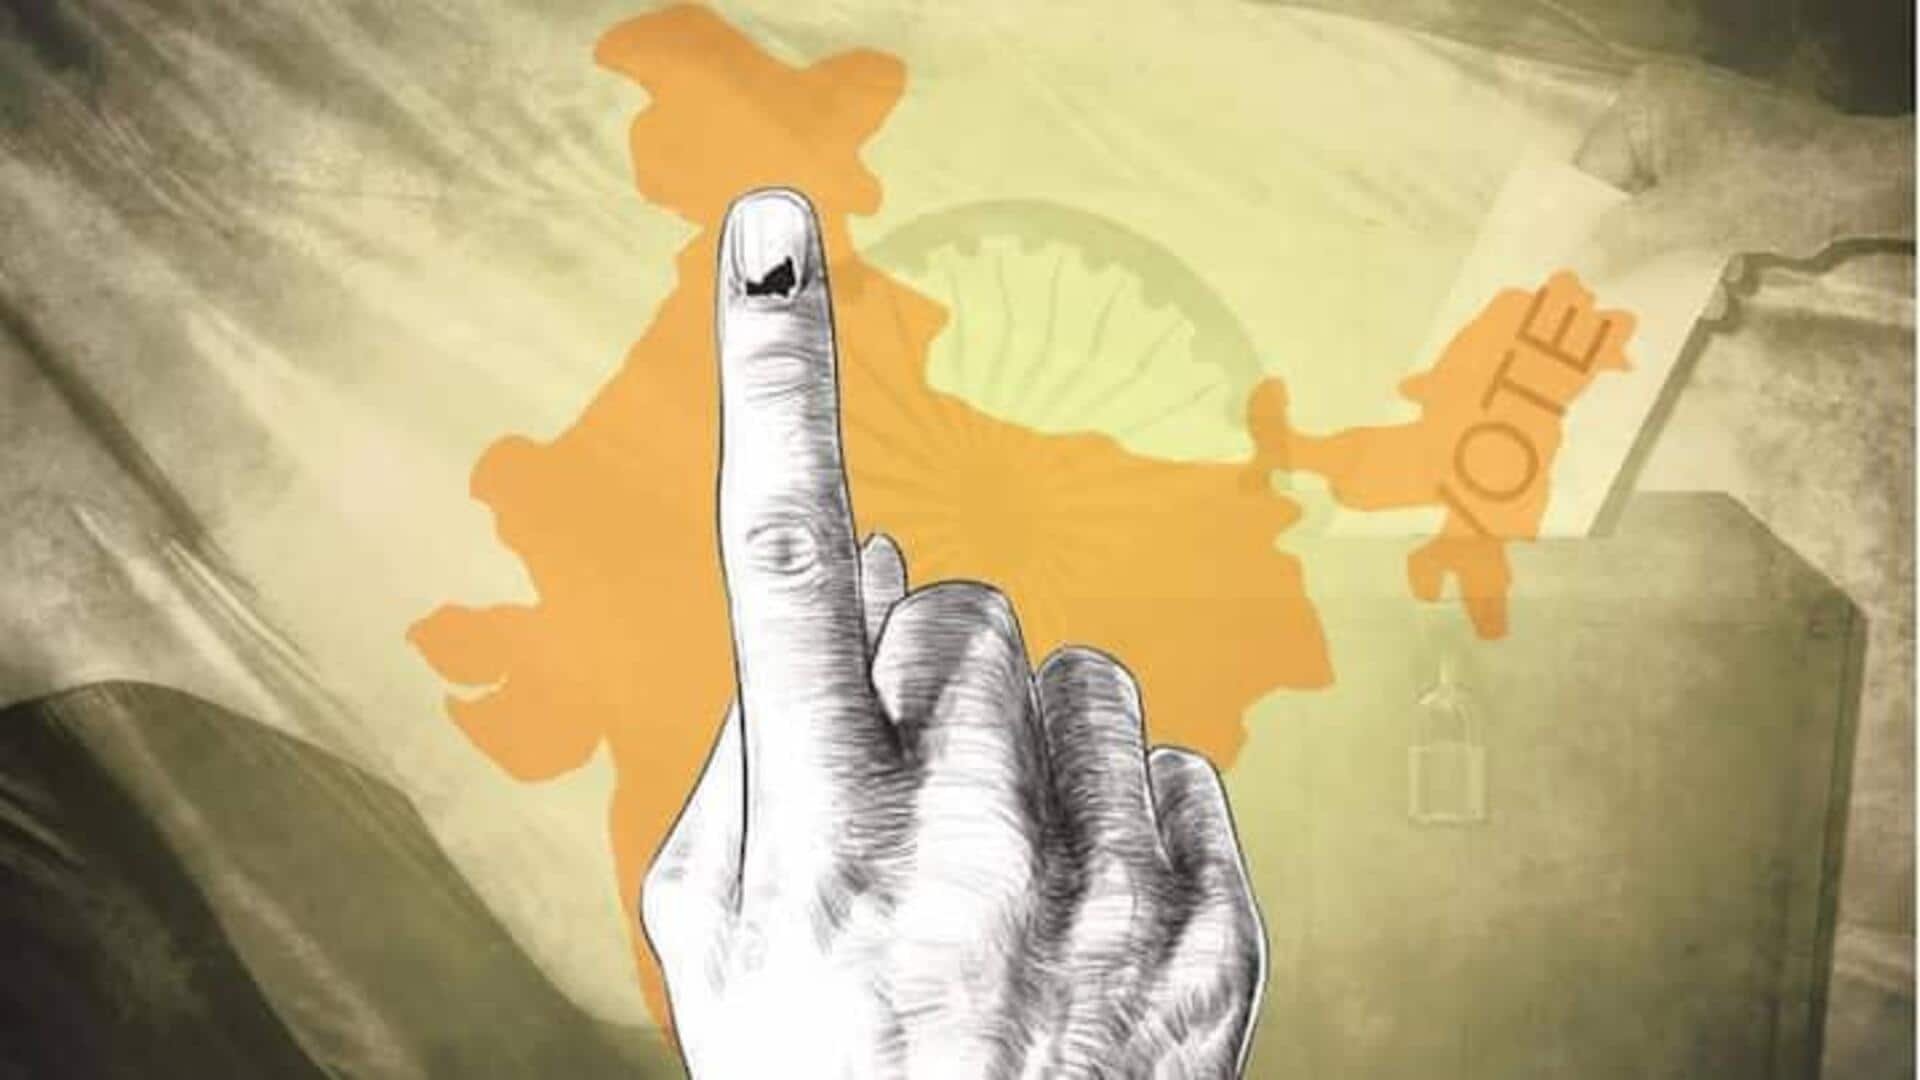 Lok Sabha elections: Everything that happened in 2nd phase 